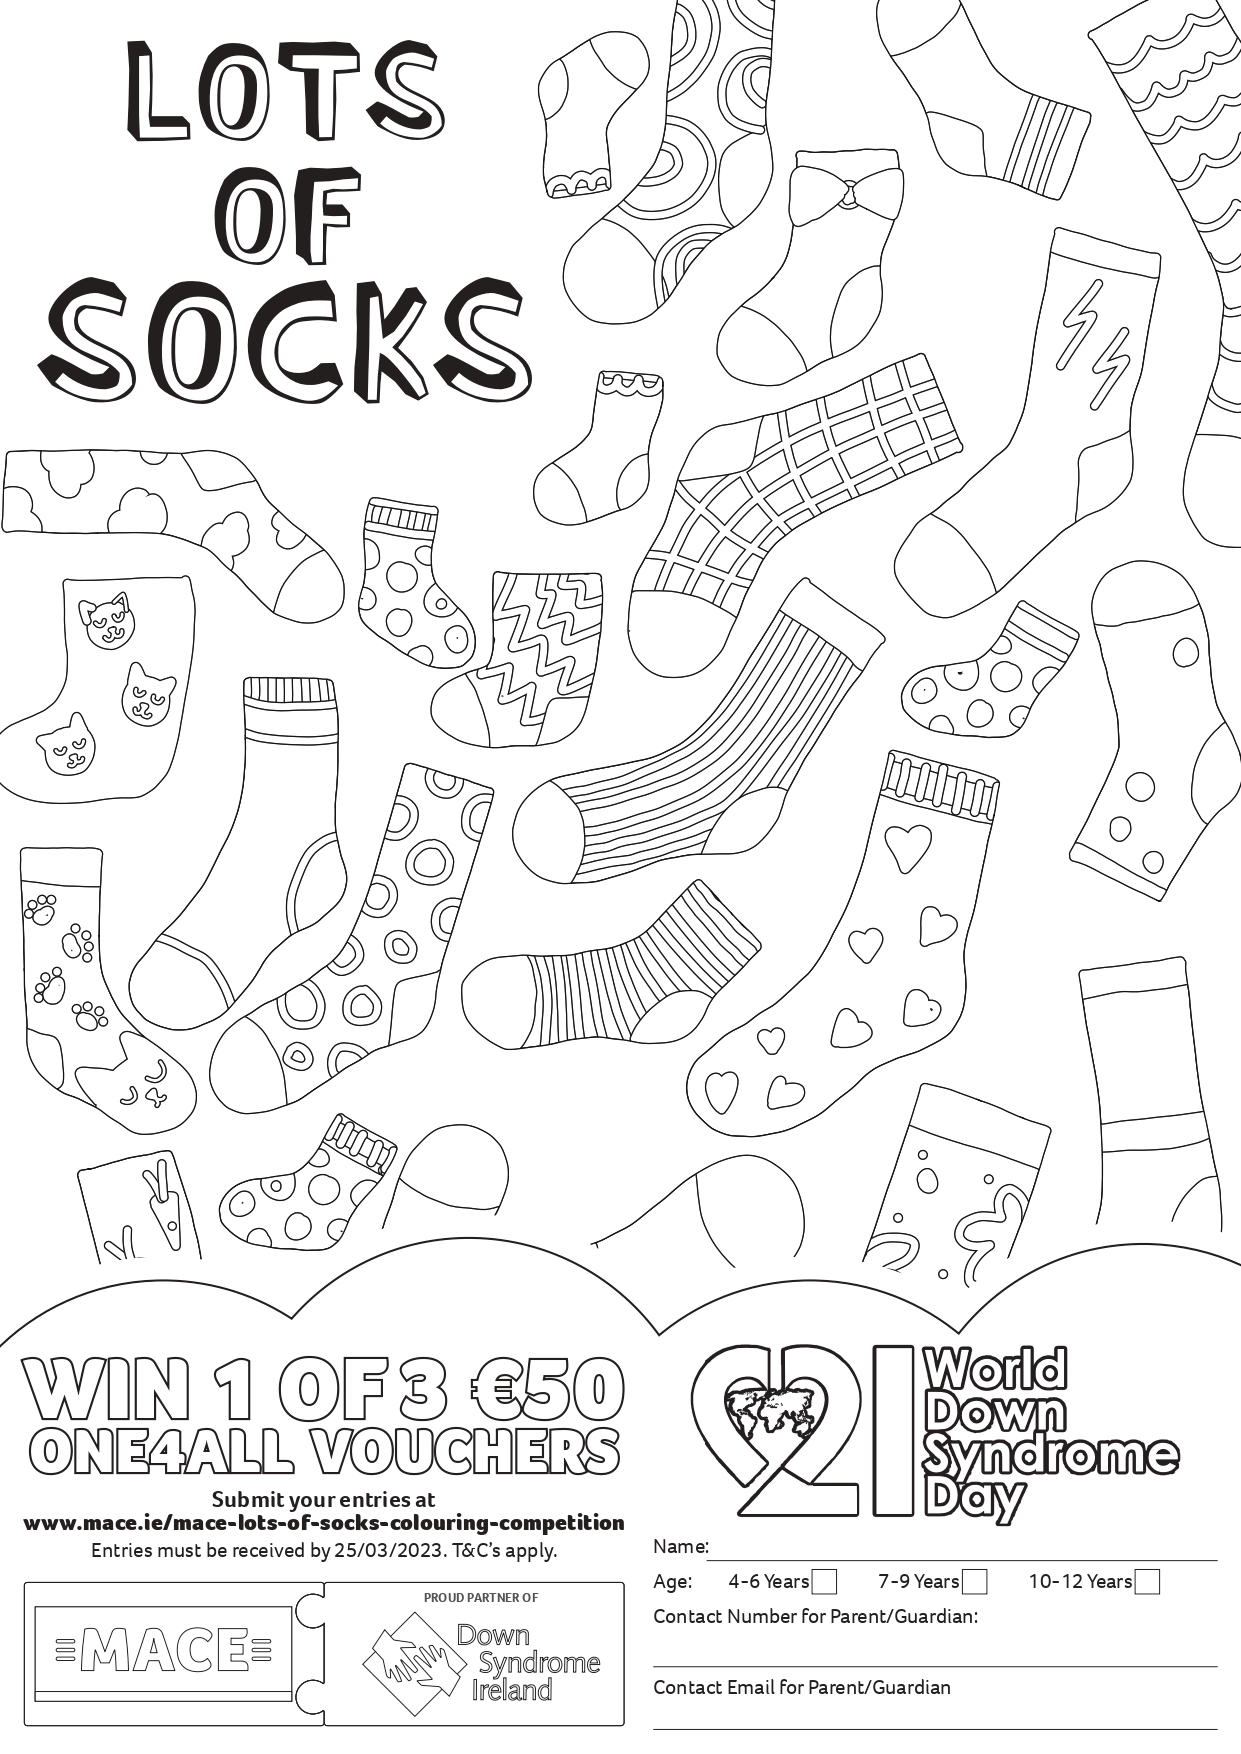 Lots of socks colouring competition